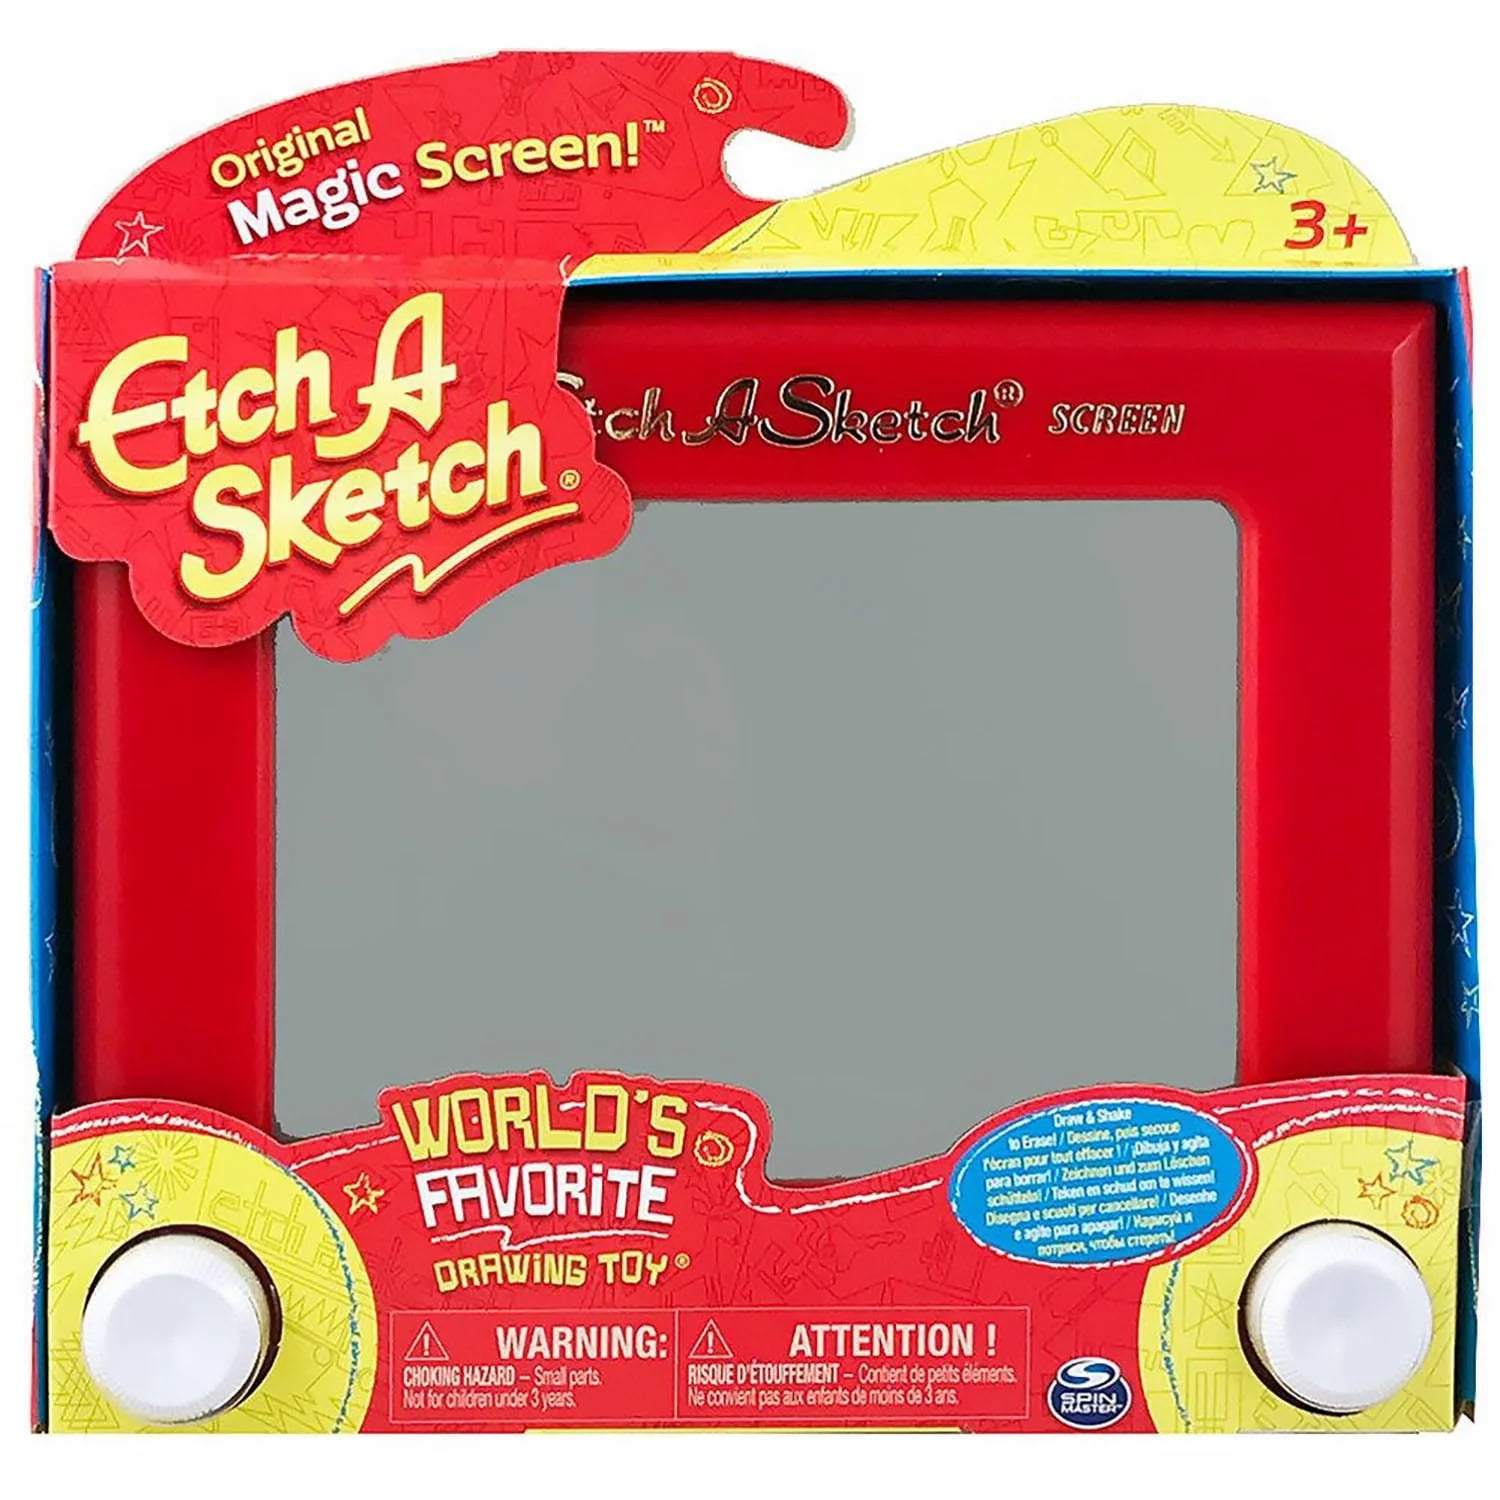 Etch A Sketch Pocket, Drawing Toy With Magic Screen, For Ages 3 And Up  (Style May Vary)